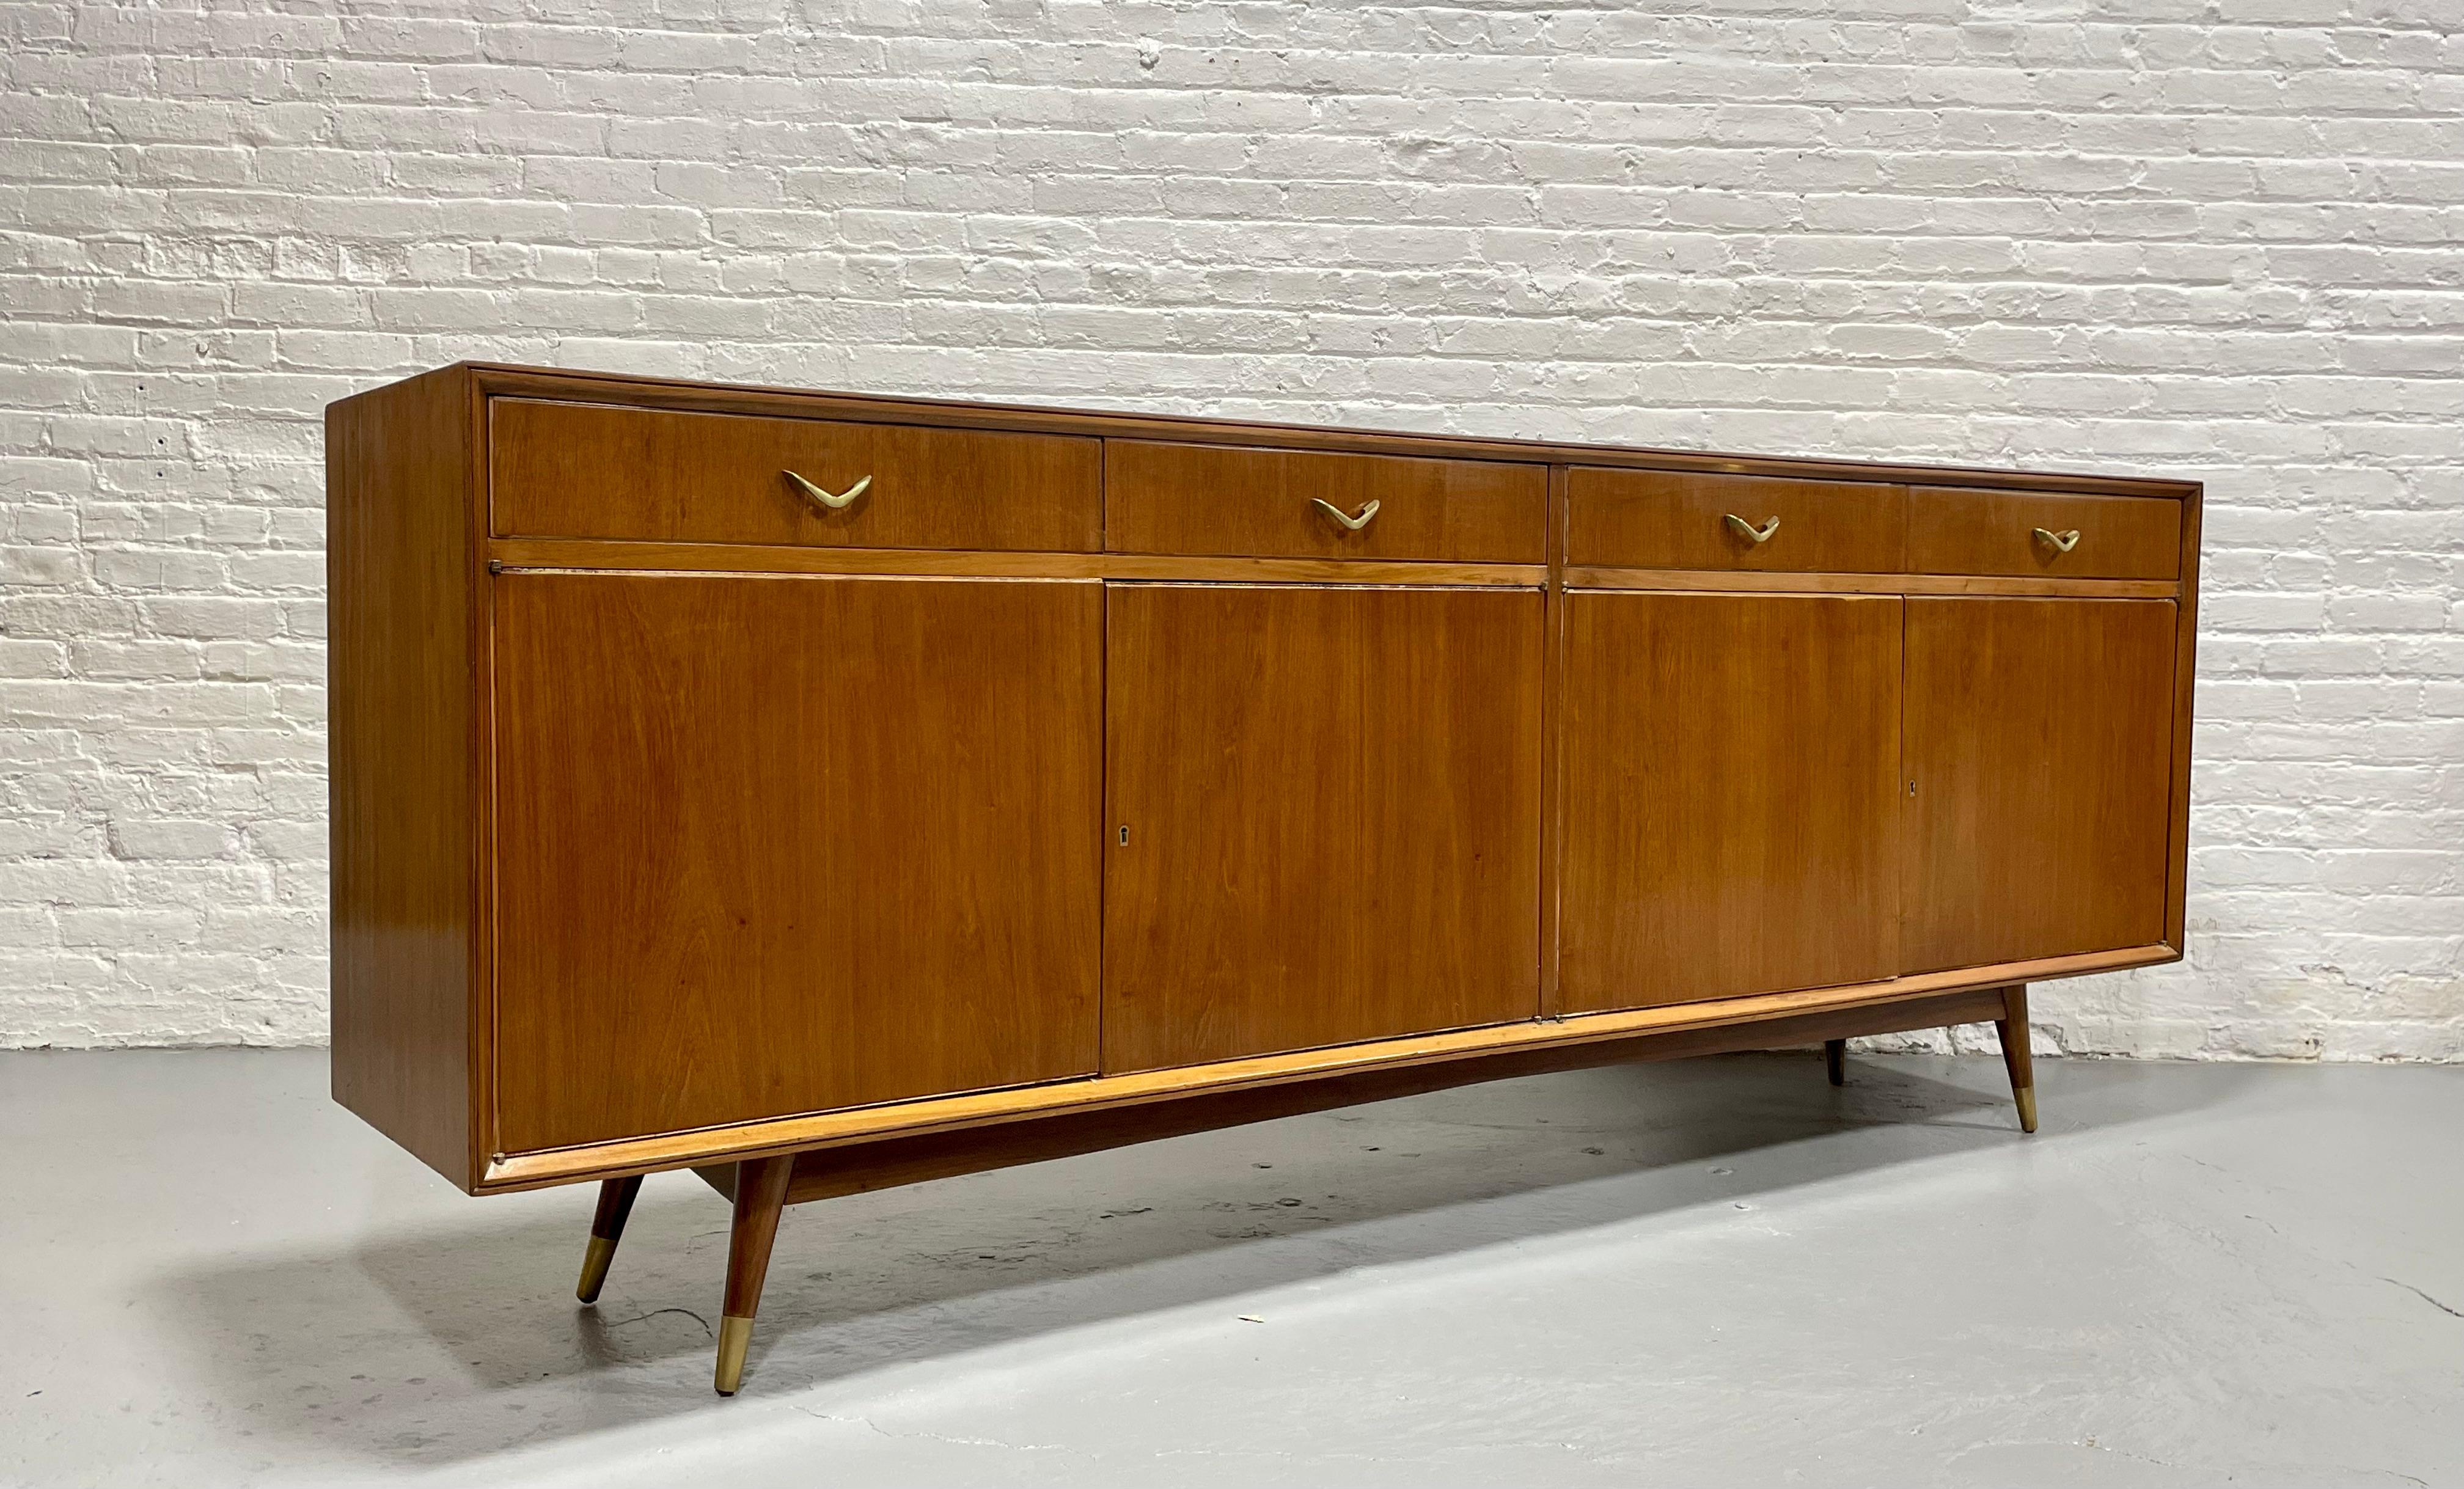 This EXTRA LONG Mid Century Modern credenza is an absolute showstopper in a hard to find length of over 8 feet. This tremendous piece boasts a rare example of French Mid Century Modern design.  Simple and classic design, brass capped legs and drawer